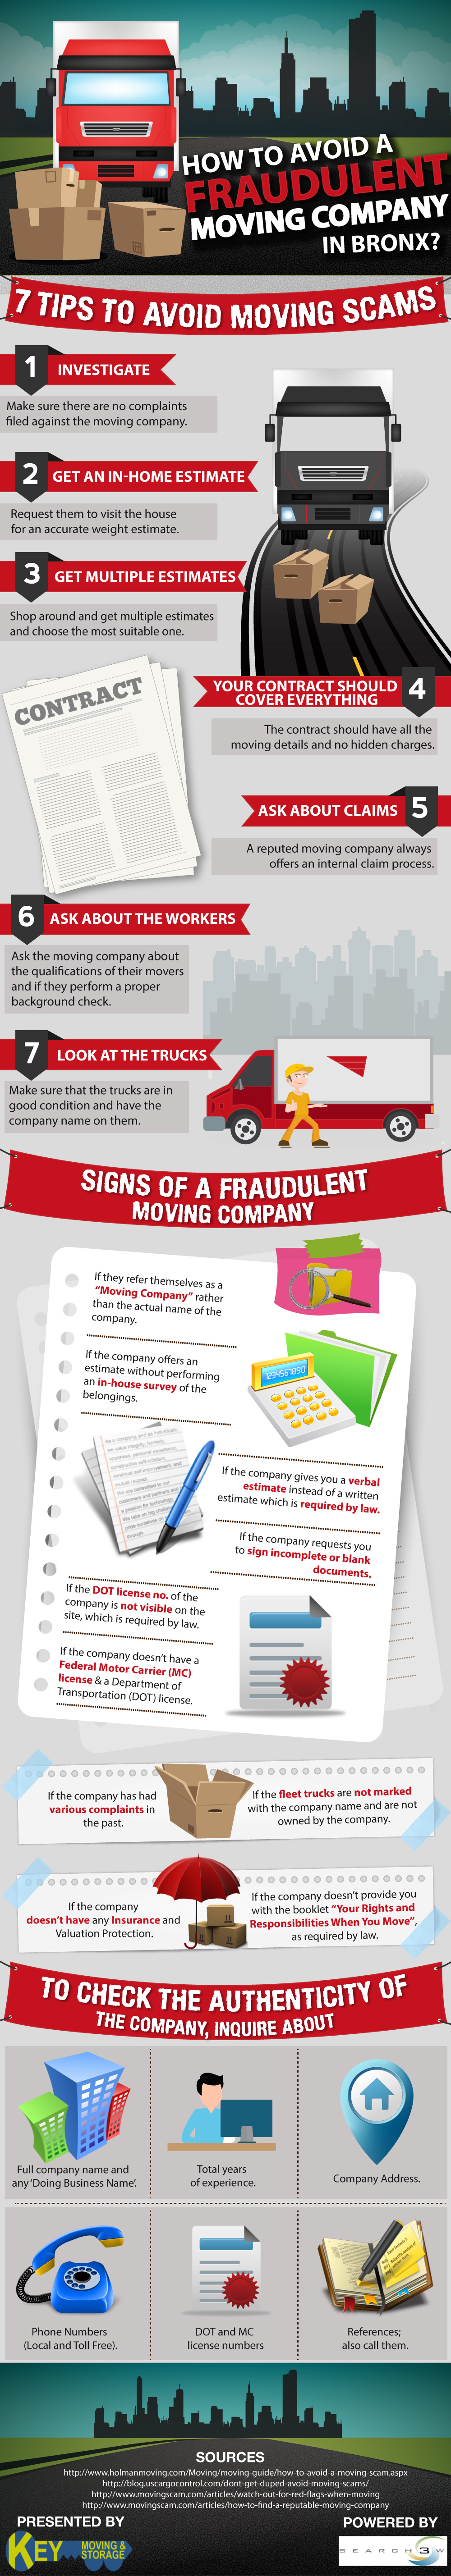 Tips-to-avoid-moving-scams-Key-Moving